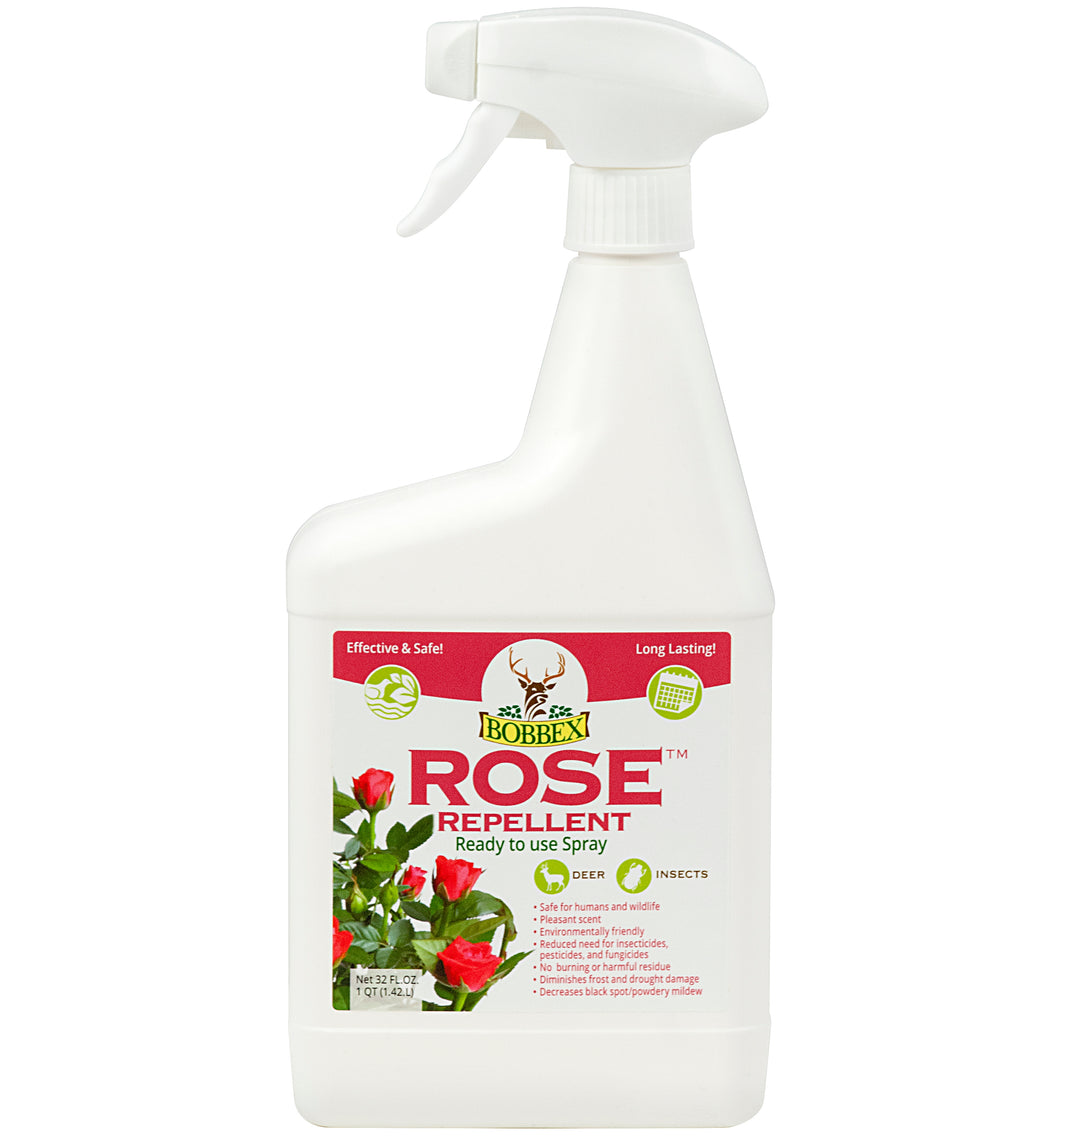 Bobbex™ Rose™ Repellent for Deer & Insects